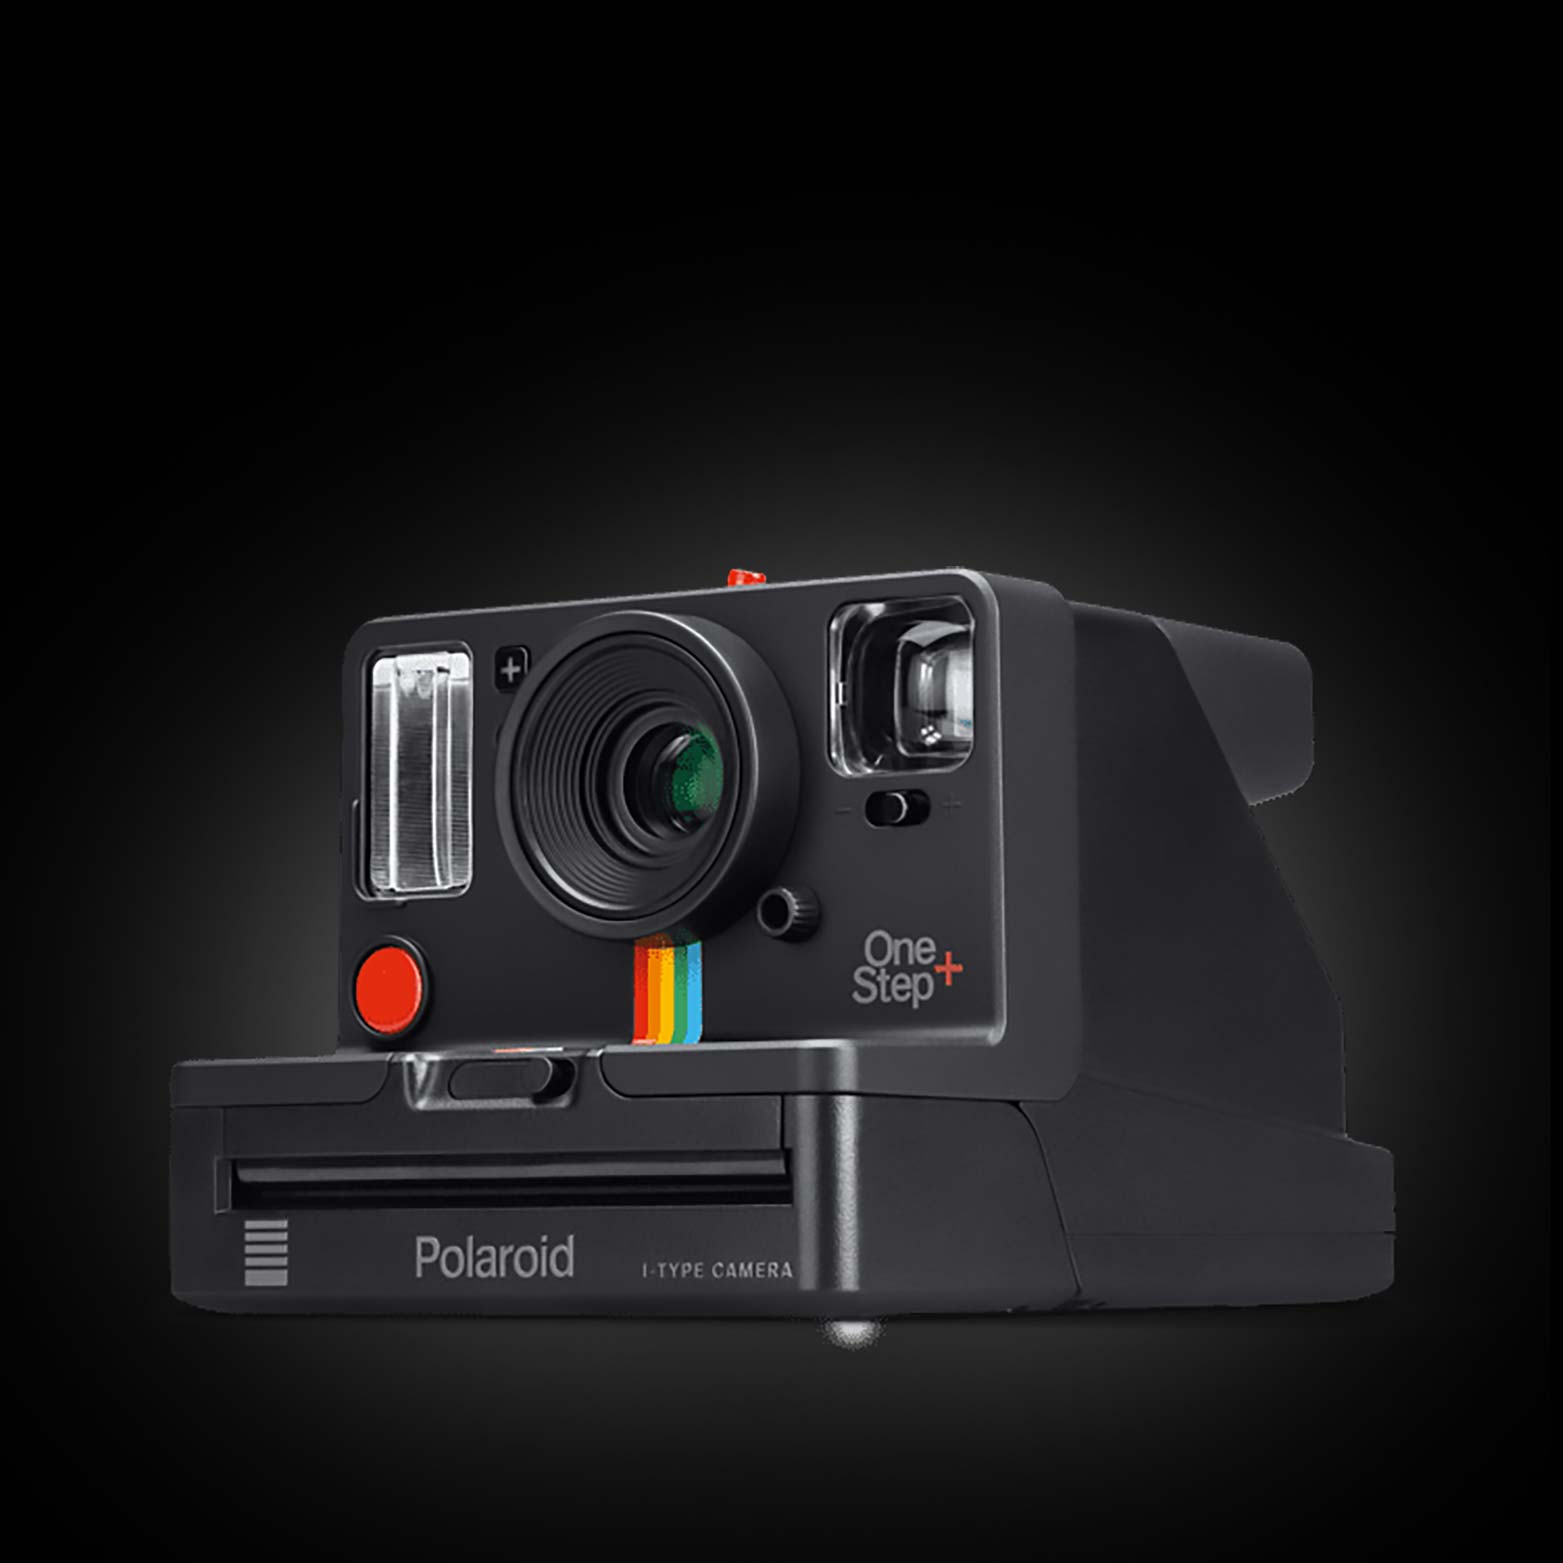 A Polaroid camera is an optical system